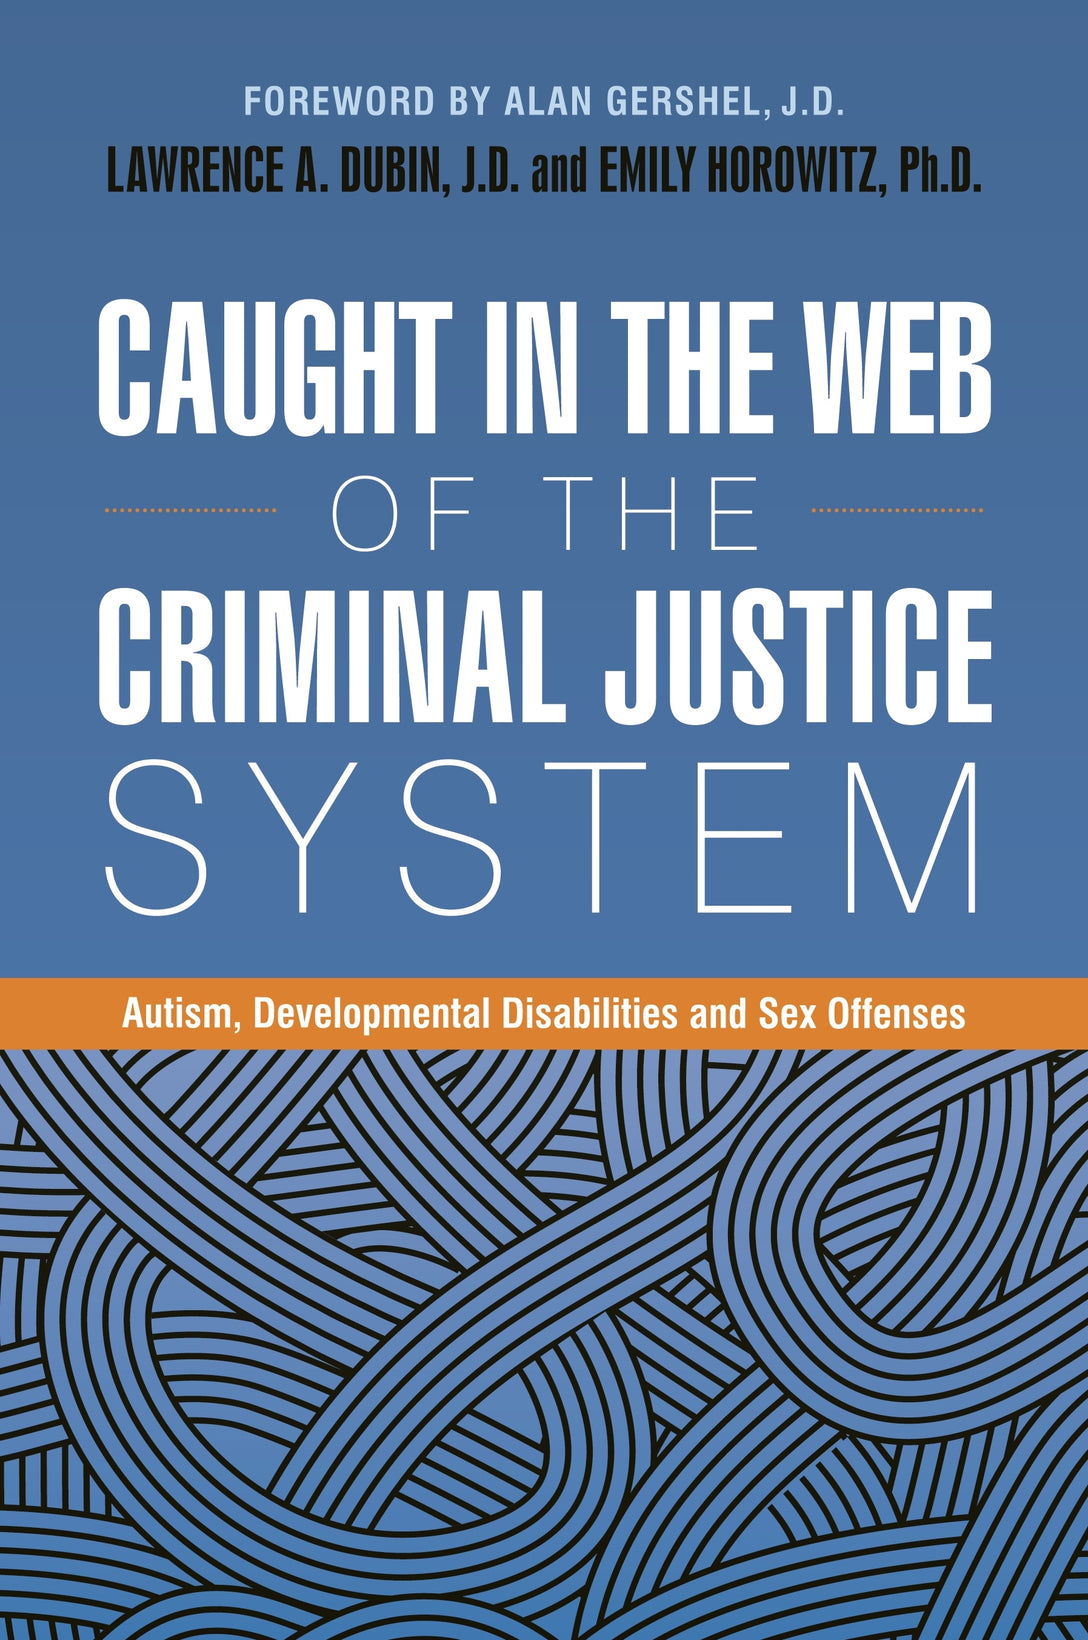 Caught in the Web of the Criminal Justice System by No Author Listed, Lawrence A. Dubin, J.D., Emily Horowitz, Ph.D., Dr Anthony Attwood, Alan Gershel